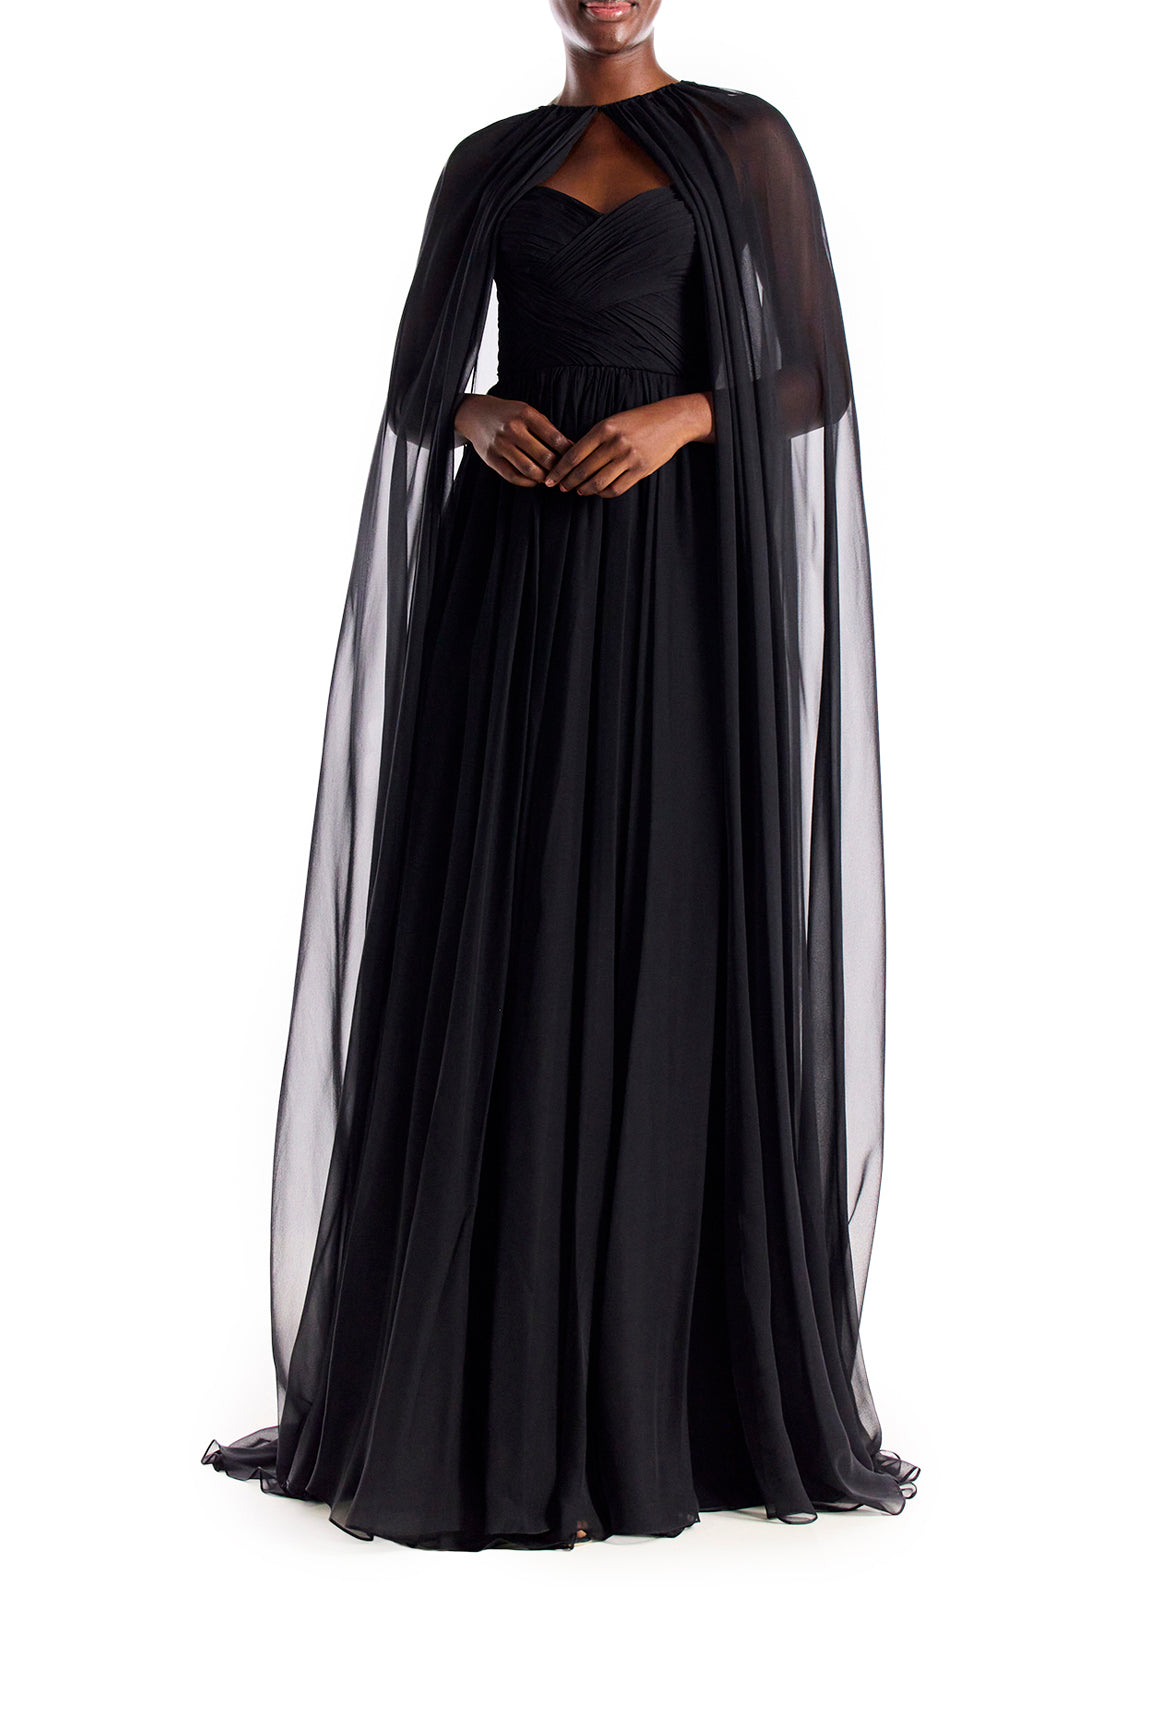 Beaded Pearl Embellished Long Fitted Cape Formal Evening Dress – Sultan  Dress